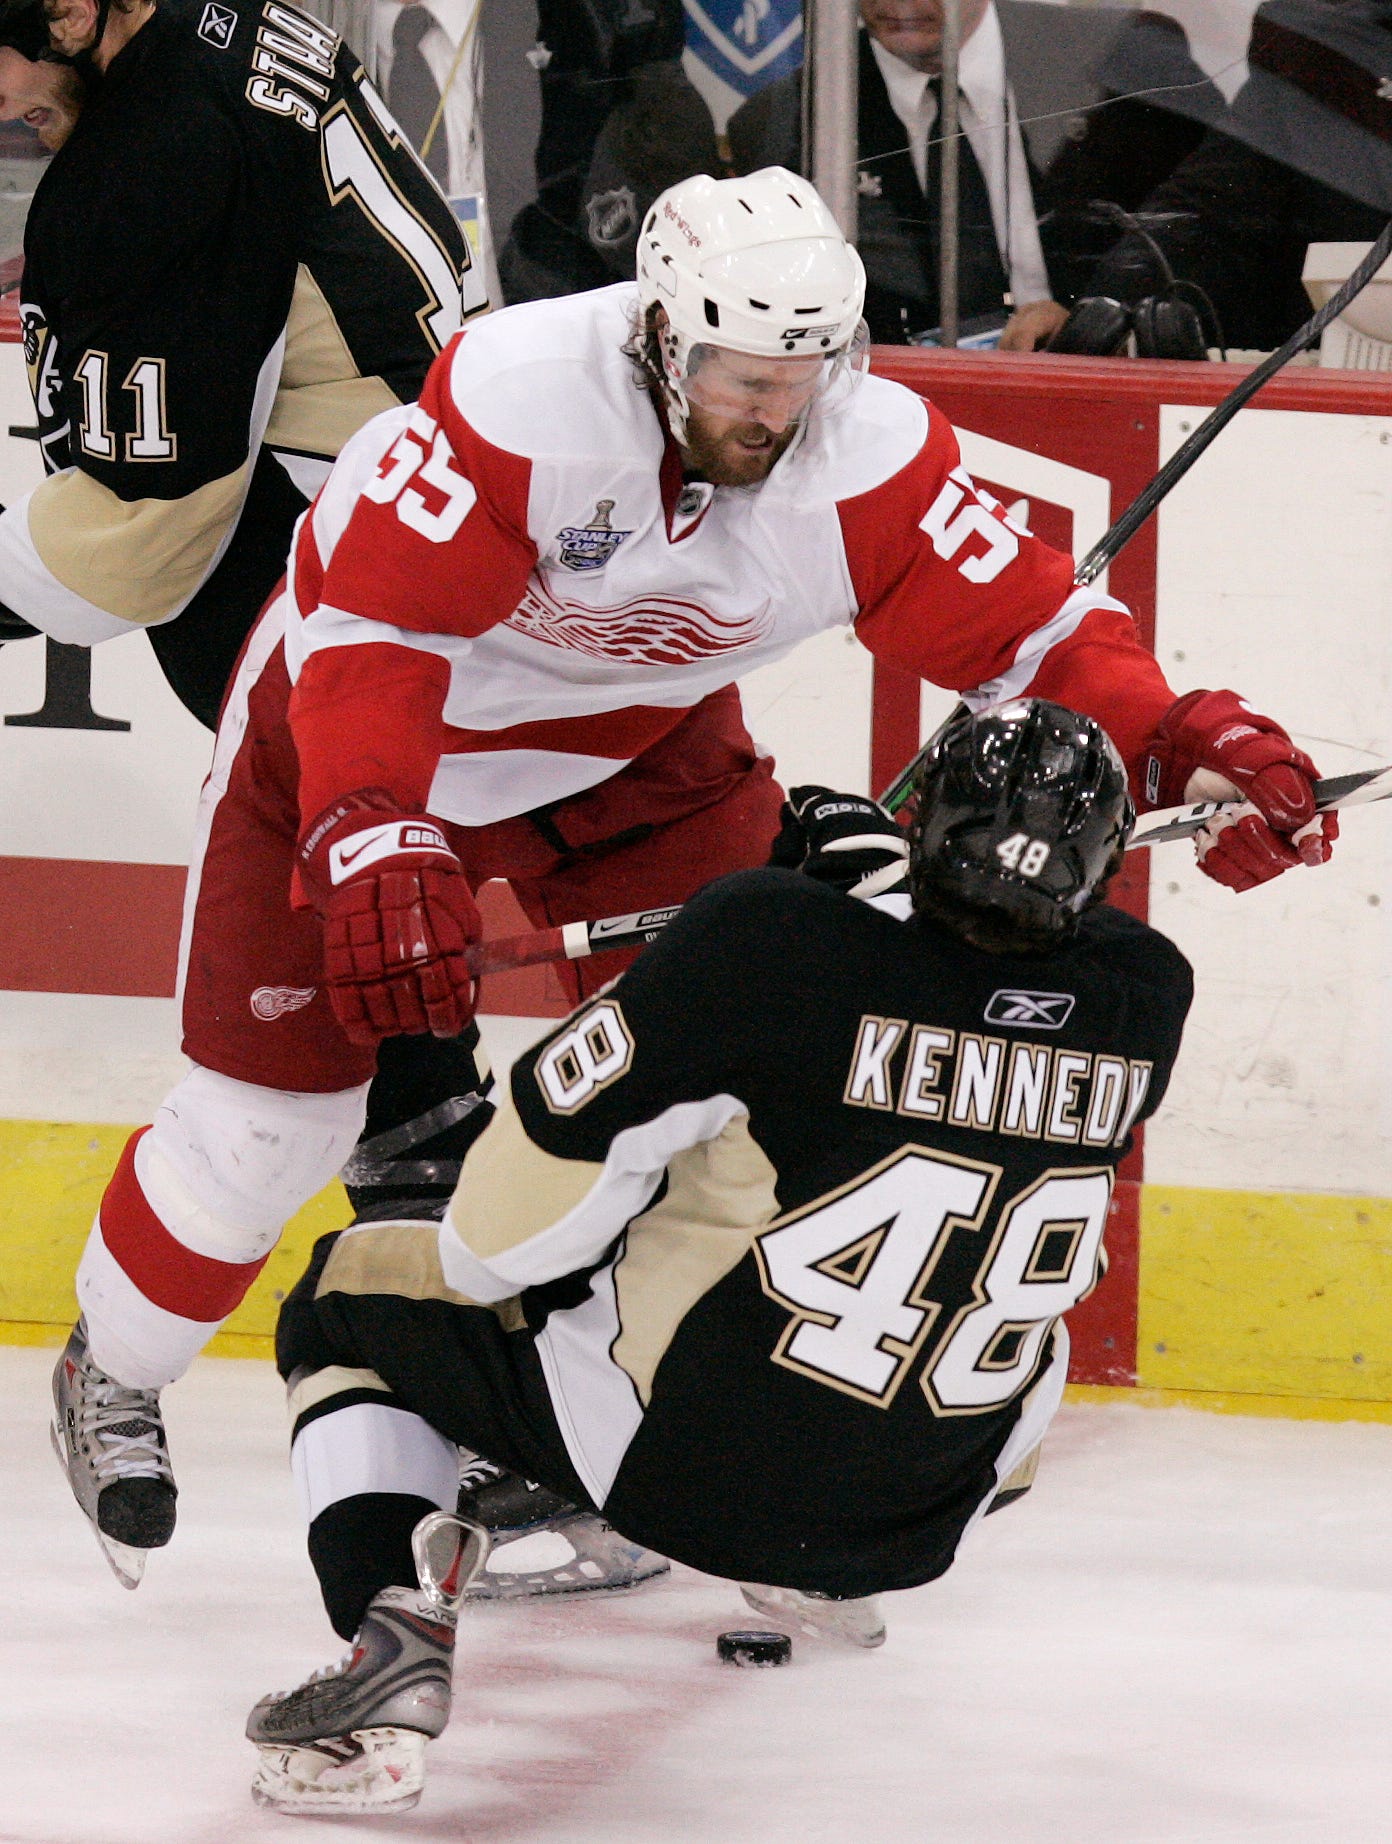 Detroit Red Wings defenseman Niklas Kronwall puts a nasty open-ice check on Pittsburgh Penguins center Tyler Kennedy during a 2-1 Red Wings victory in Game 4 of the Stanley Cup Finals at Mellon Arena in Pittsburg on Saturday, May 31, 2008.